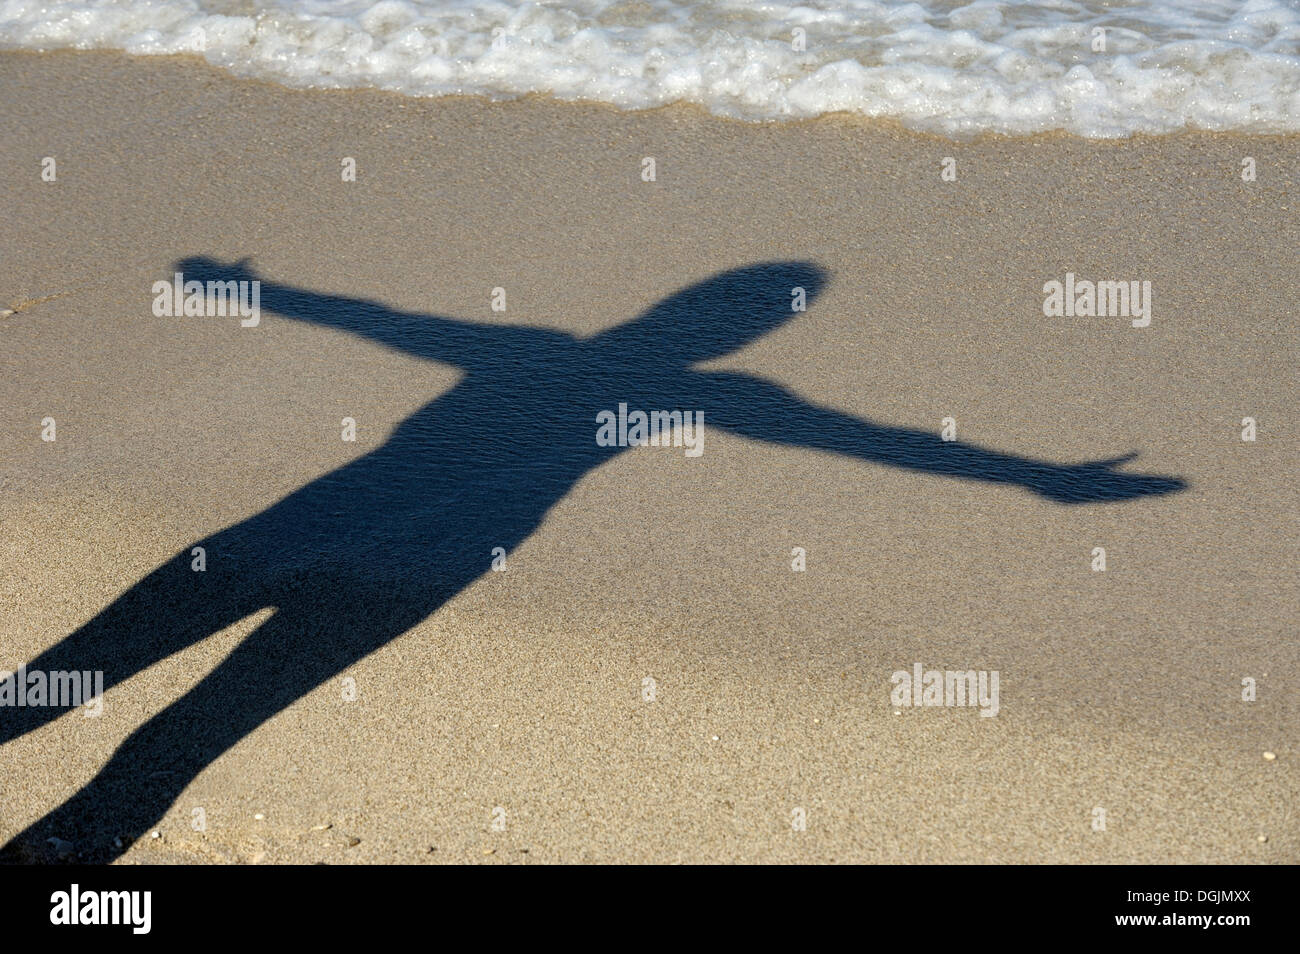 Woman with outstretched arms casting her shadow on the beach, Kathisma, Lefkas or Lefkada, Greece, Europe Stock Photo